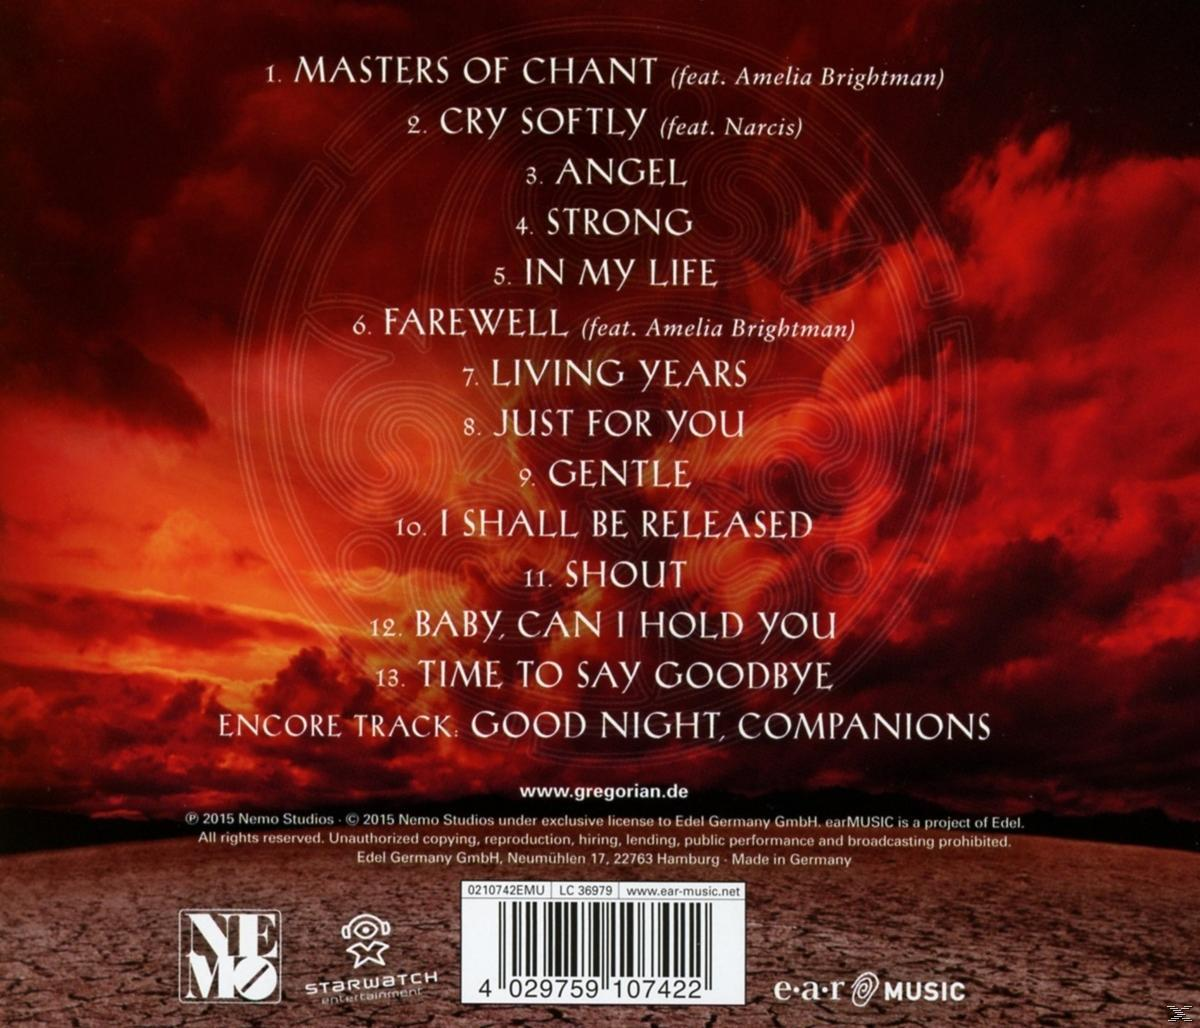 - X-The Final Gregorian Chapter Of (CD) - Chant Masters